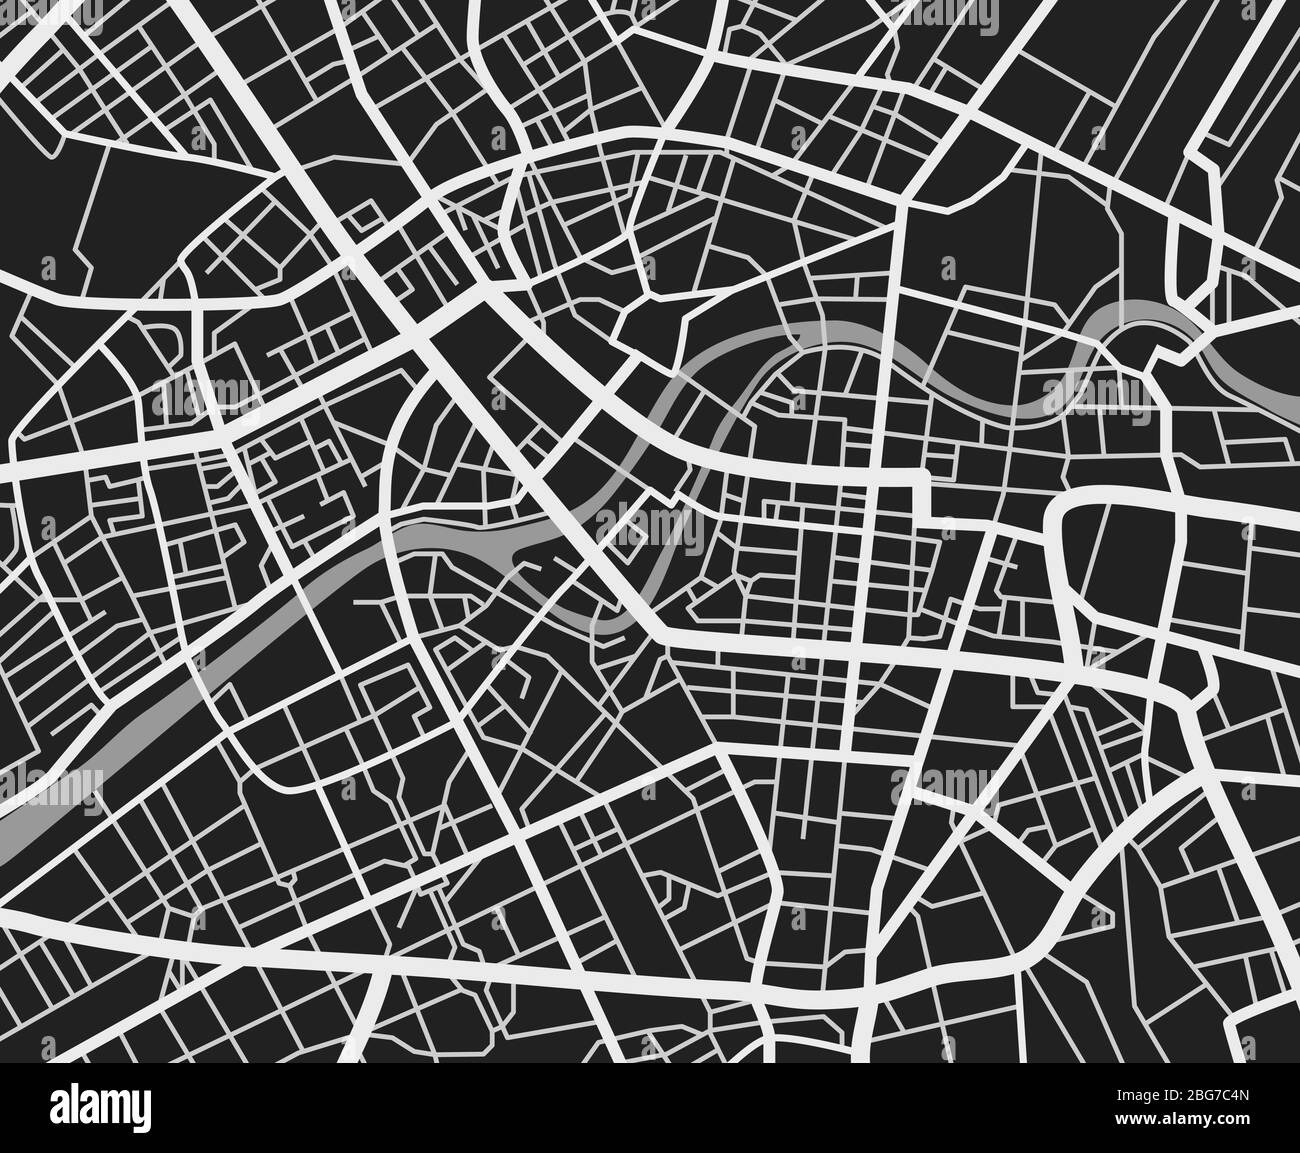 Black And White Travel City Map Urban Transport Roads Vector Cartography Background City Road Background Cartography Downtown Urban Town Navigatio 2BG7C4N 